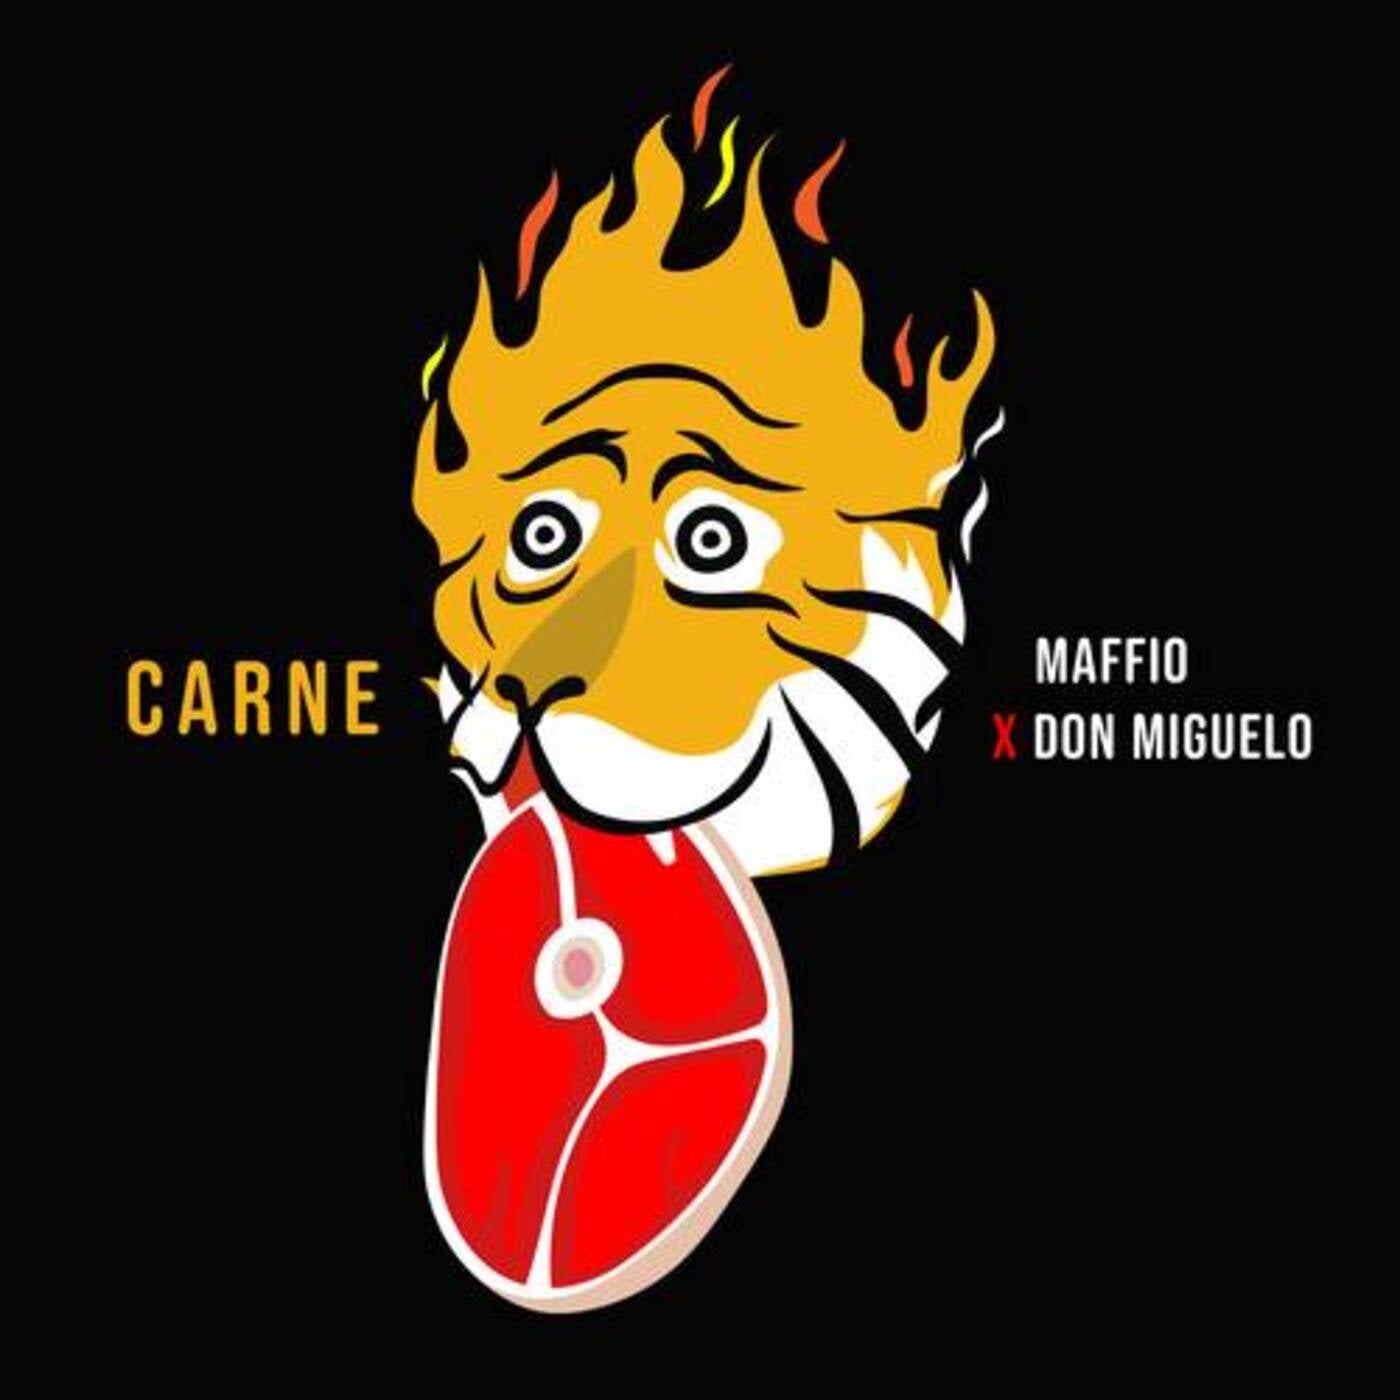 Carne by Maffio and Don Miguelo on Beatsource